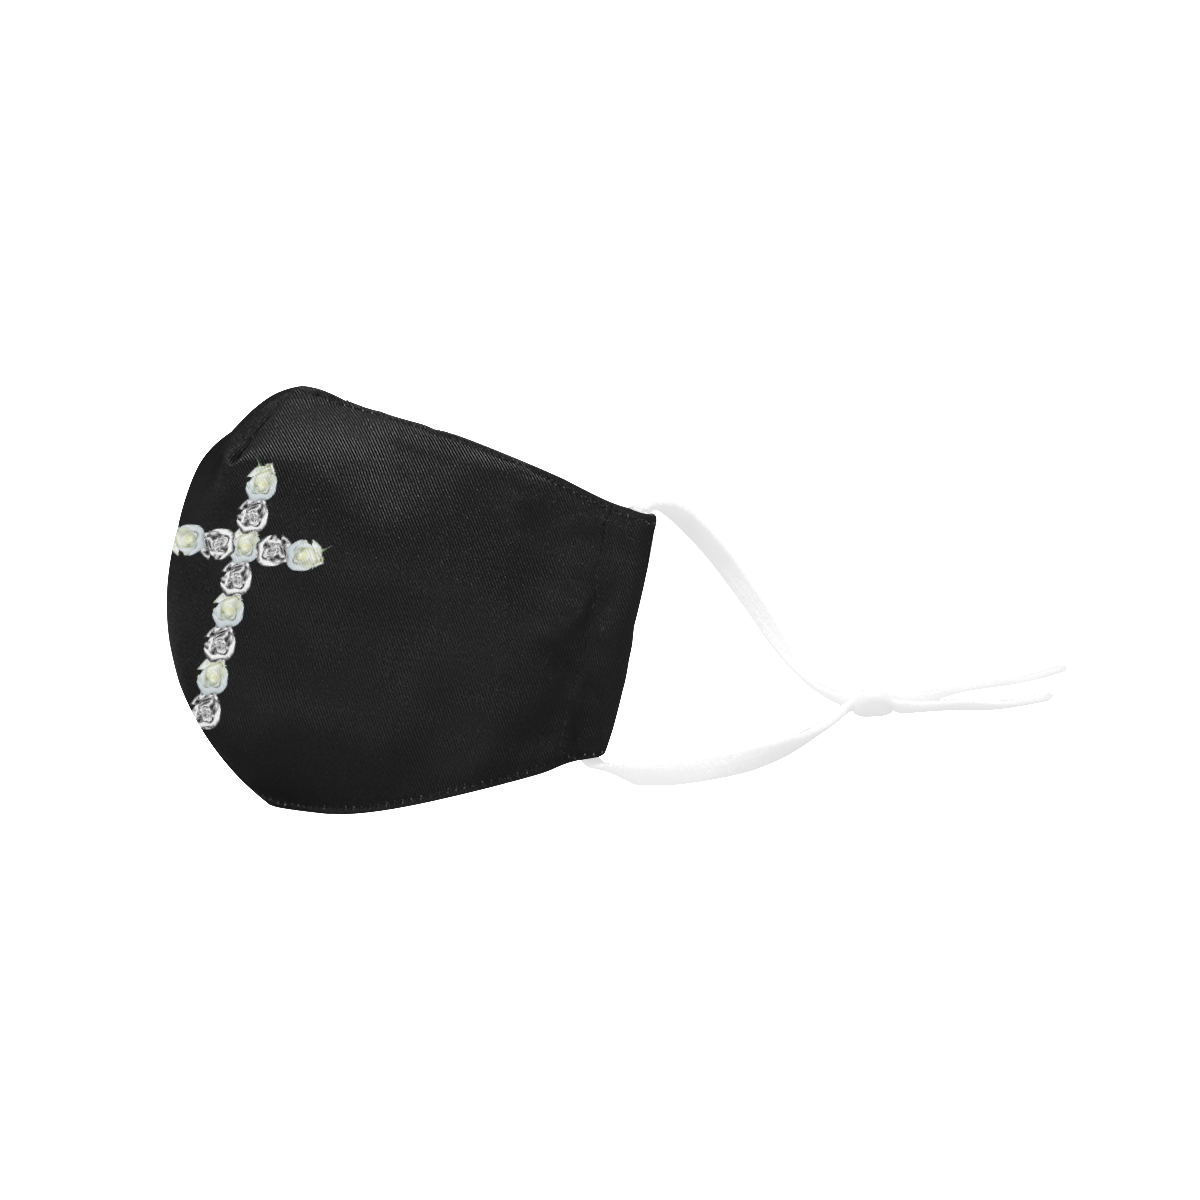 Christian Cross of Silver and White Rosebuds 3D Mouth Mask with Drawstring (Pack of 3) (Model M04)